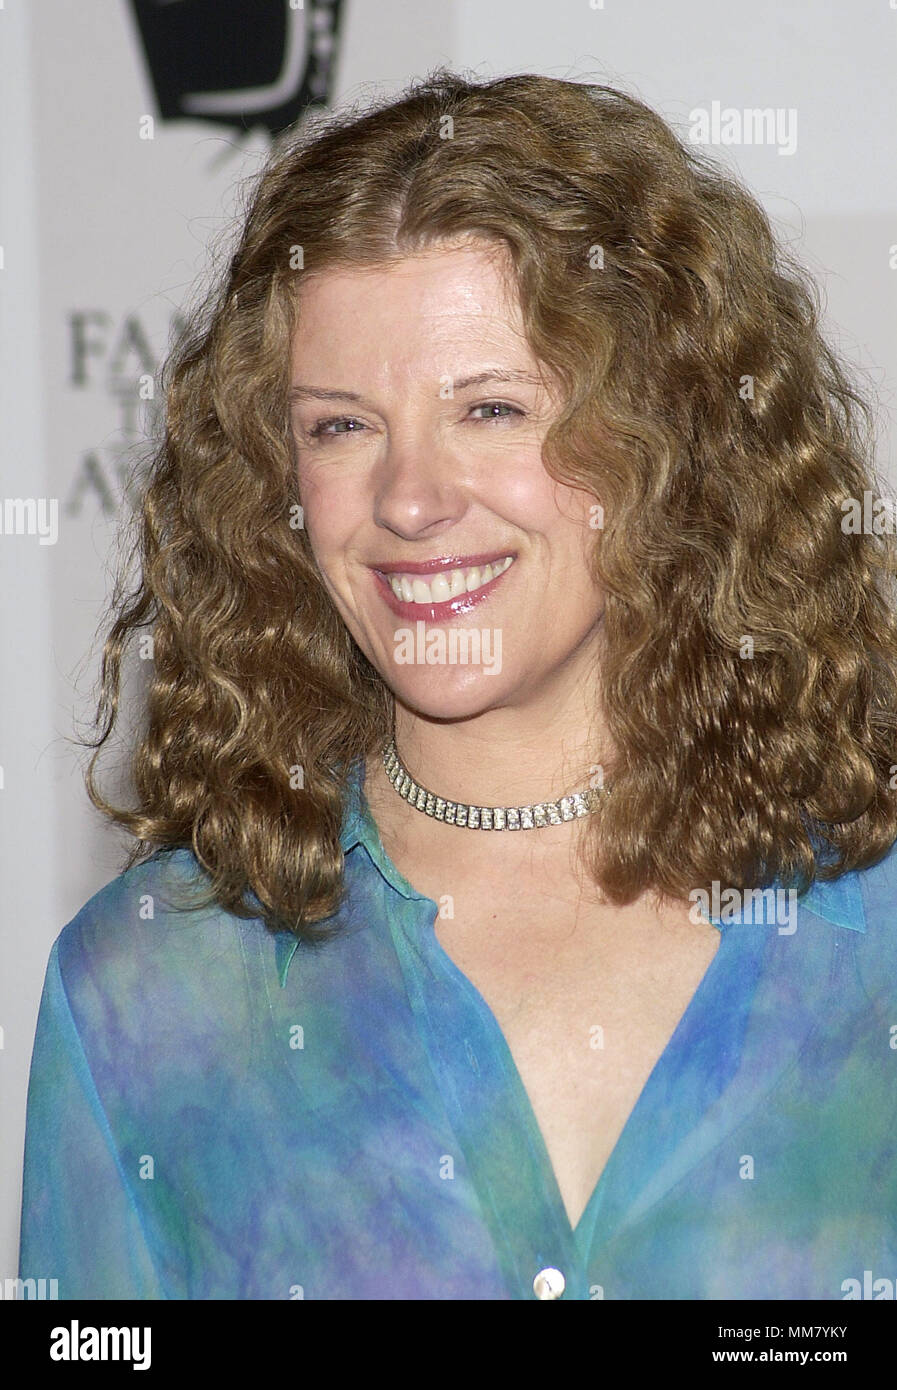 Mimi Kennedy - Dharma & Greg -  received a recognition  at the 3rd Annual Family Television Awards at the Beverly Hilton in Los Angeles.  August 2, 2001   © TsuniKennedyMimi Dharma&Greg02.jpgKennedyMimi Dharma&Greg02 Red Carpet Event, Vertical, USA, Film Industry, Celebrities,  Photography, Bestof, Arts Culture and Entertainment, Topix Celebrities fashion /  Vertical, Best of, Event in Hollywood Life - California,  Red Carpet and backstage, USA, Film Industry, Celebrities,  movie celebrities, TV celebrities, Music celebrities, Photography, Bestof, Arts Culture and Entertainment,  Topix, headsh Stock Photo